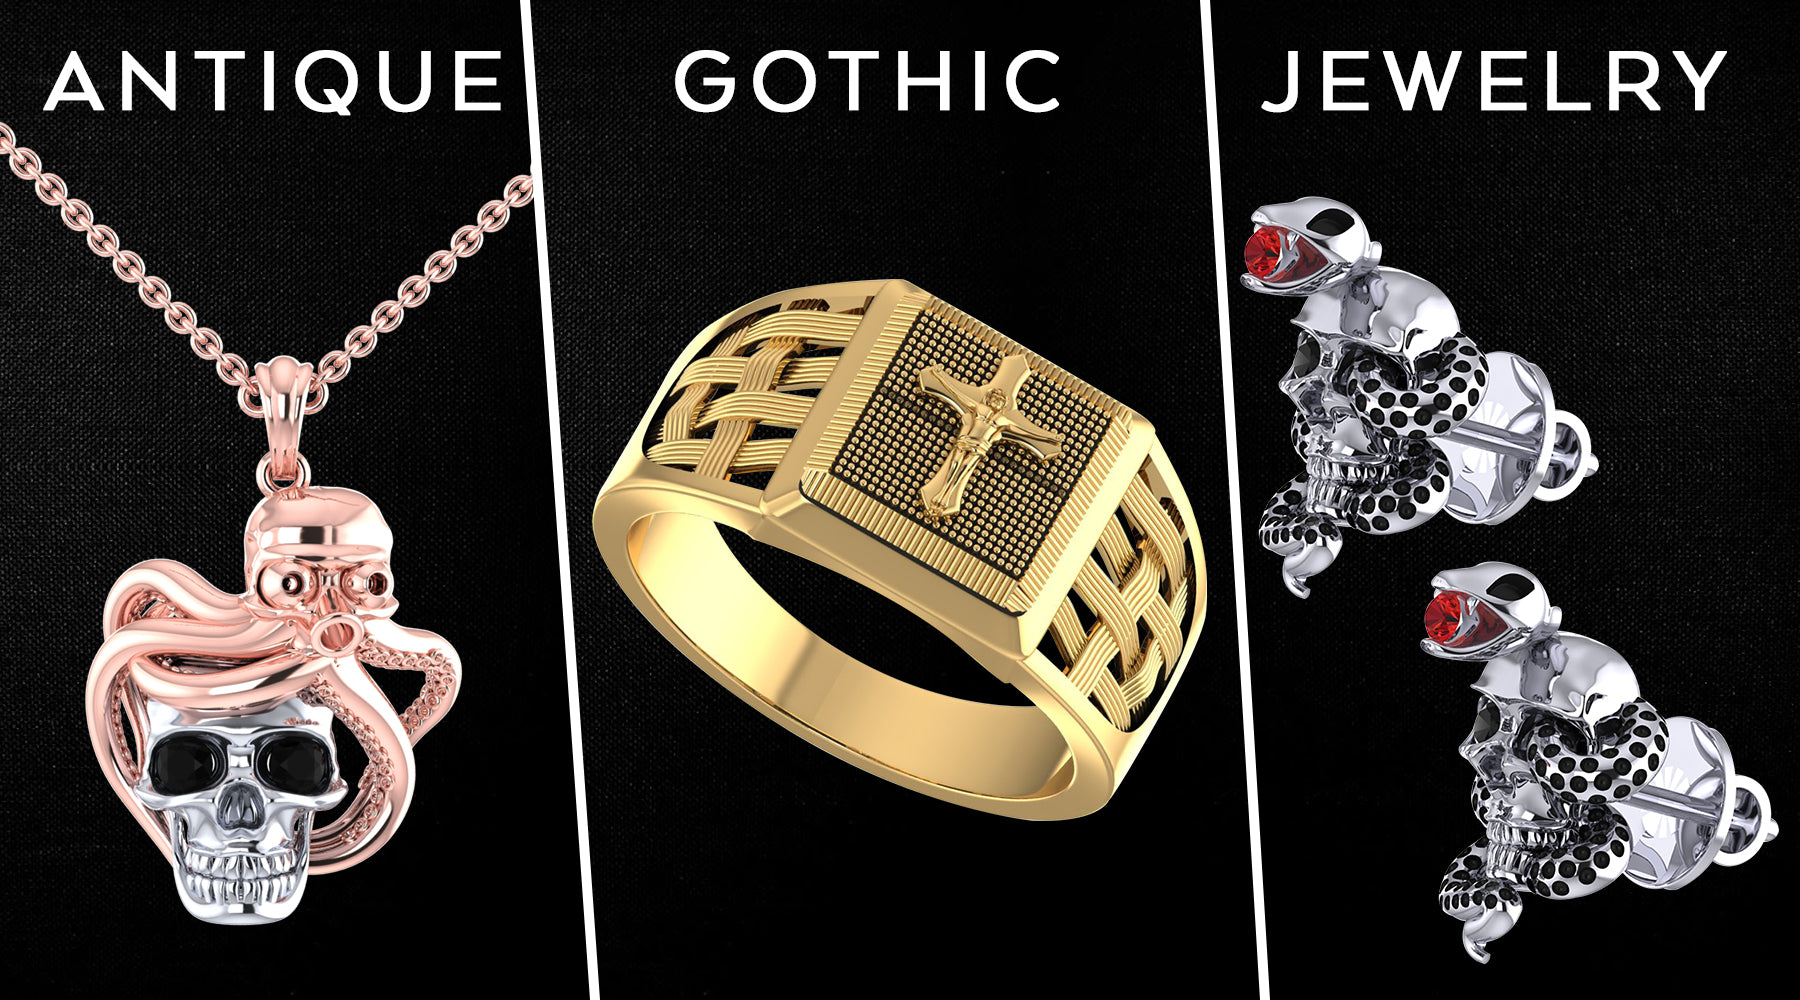 A Vintage and Antique Gothic Jewelry Collection that Embraces Decay